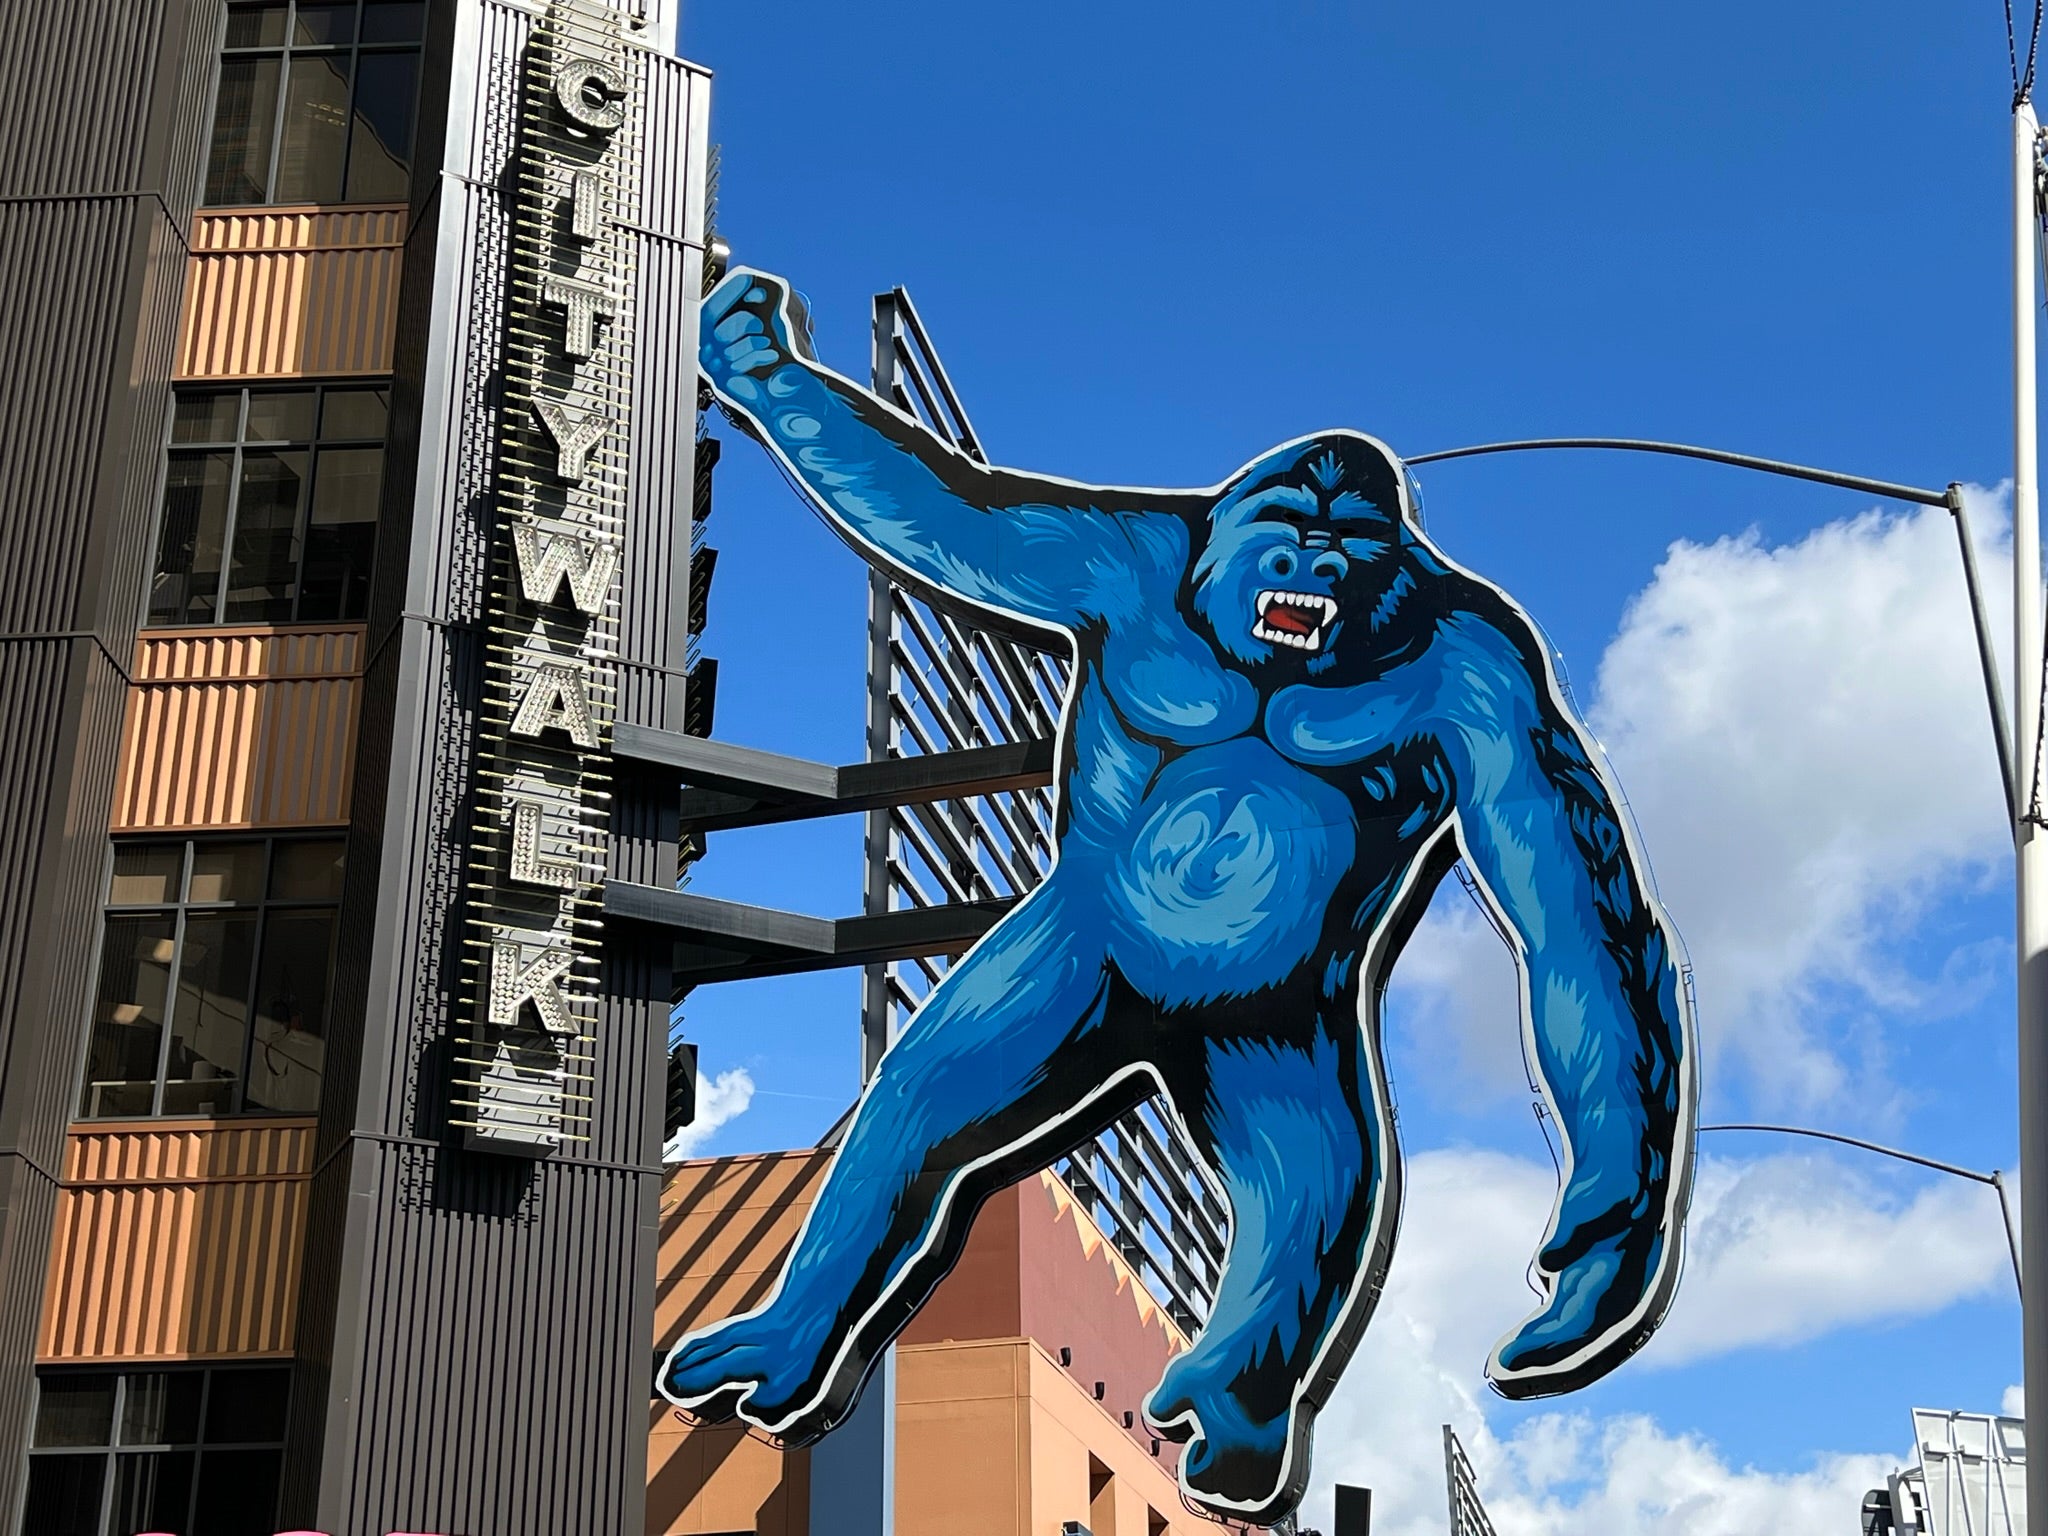 Universal CityWalk to open on limited basis Thursday